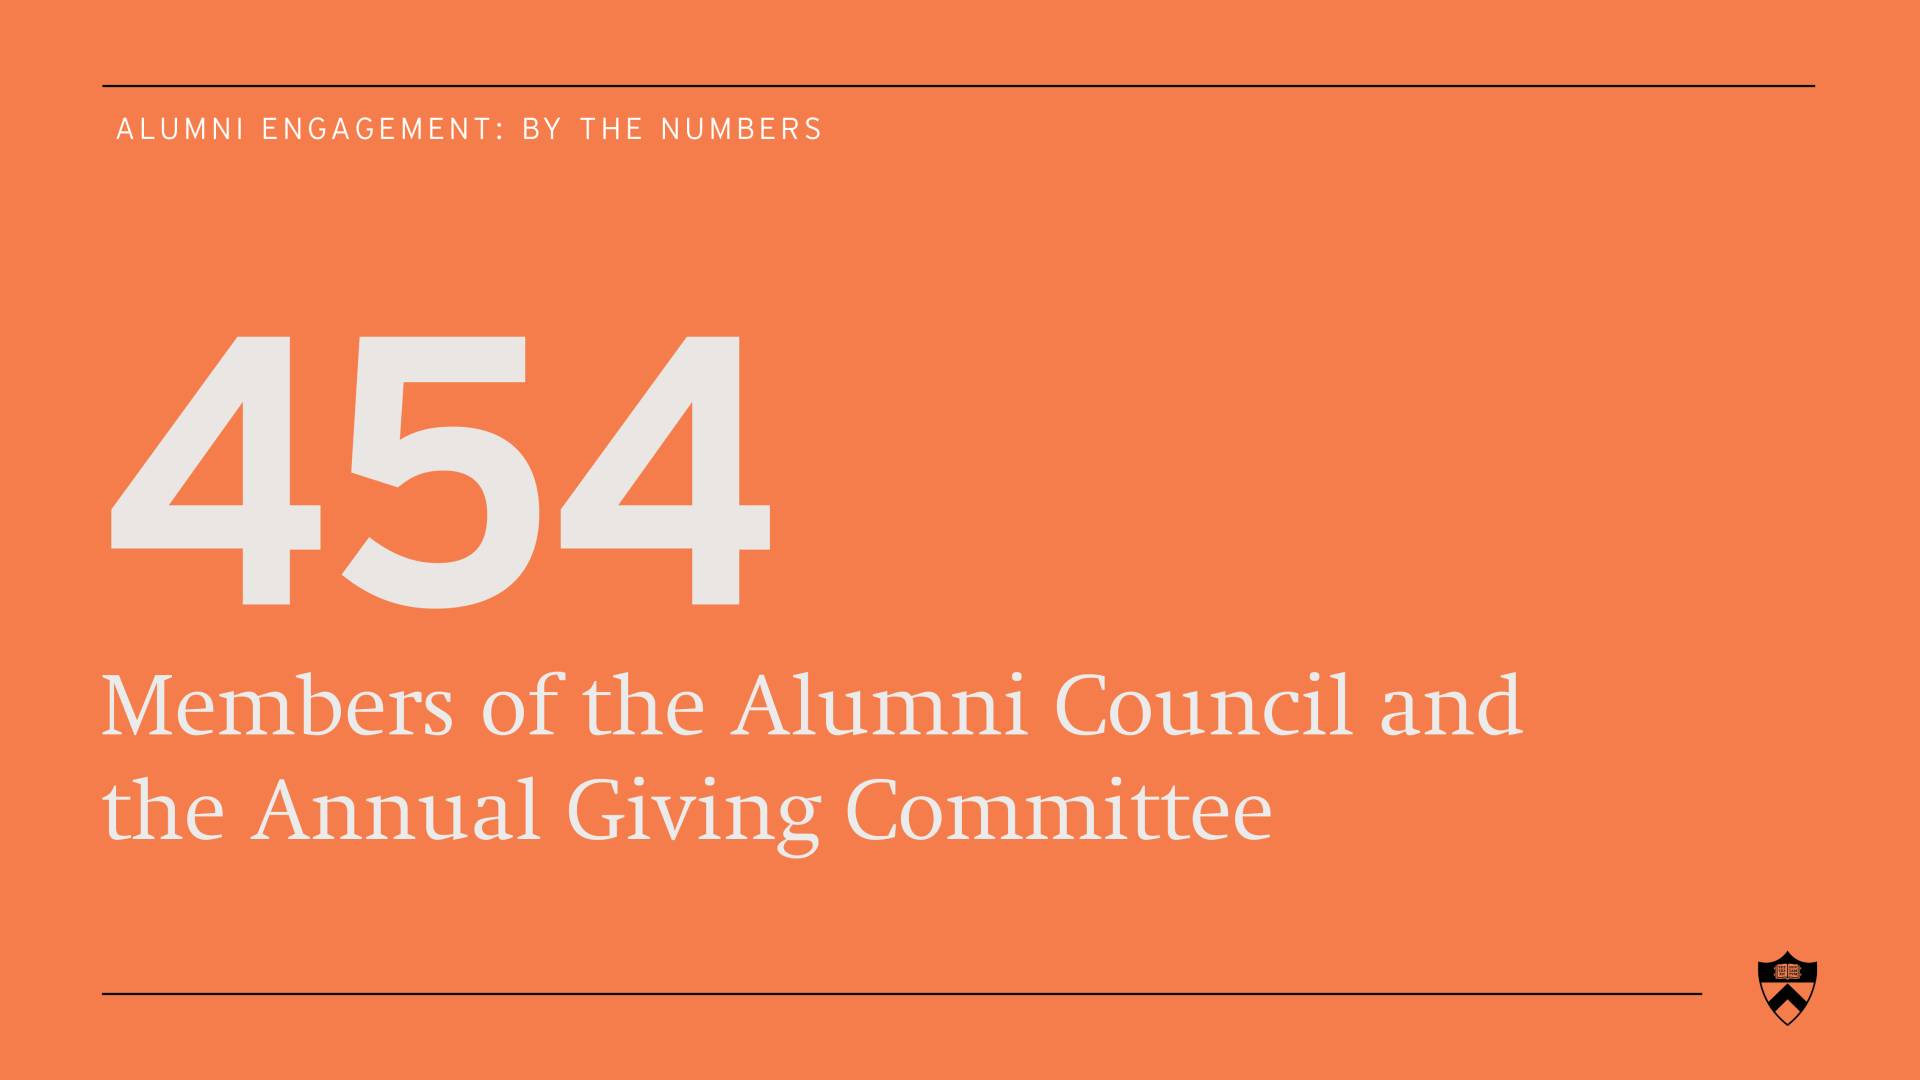 Members of the Alumni Council and the Annual Giving Committee: 454